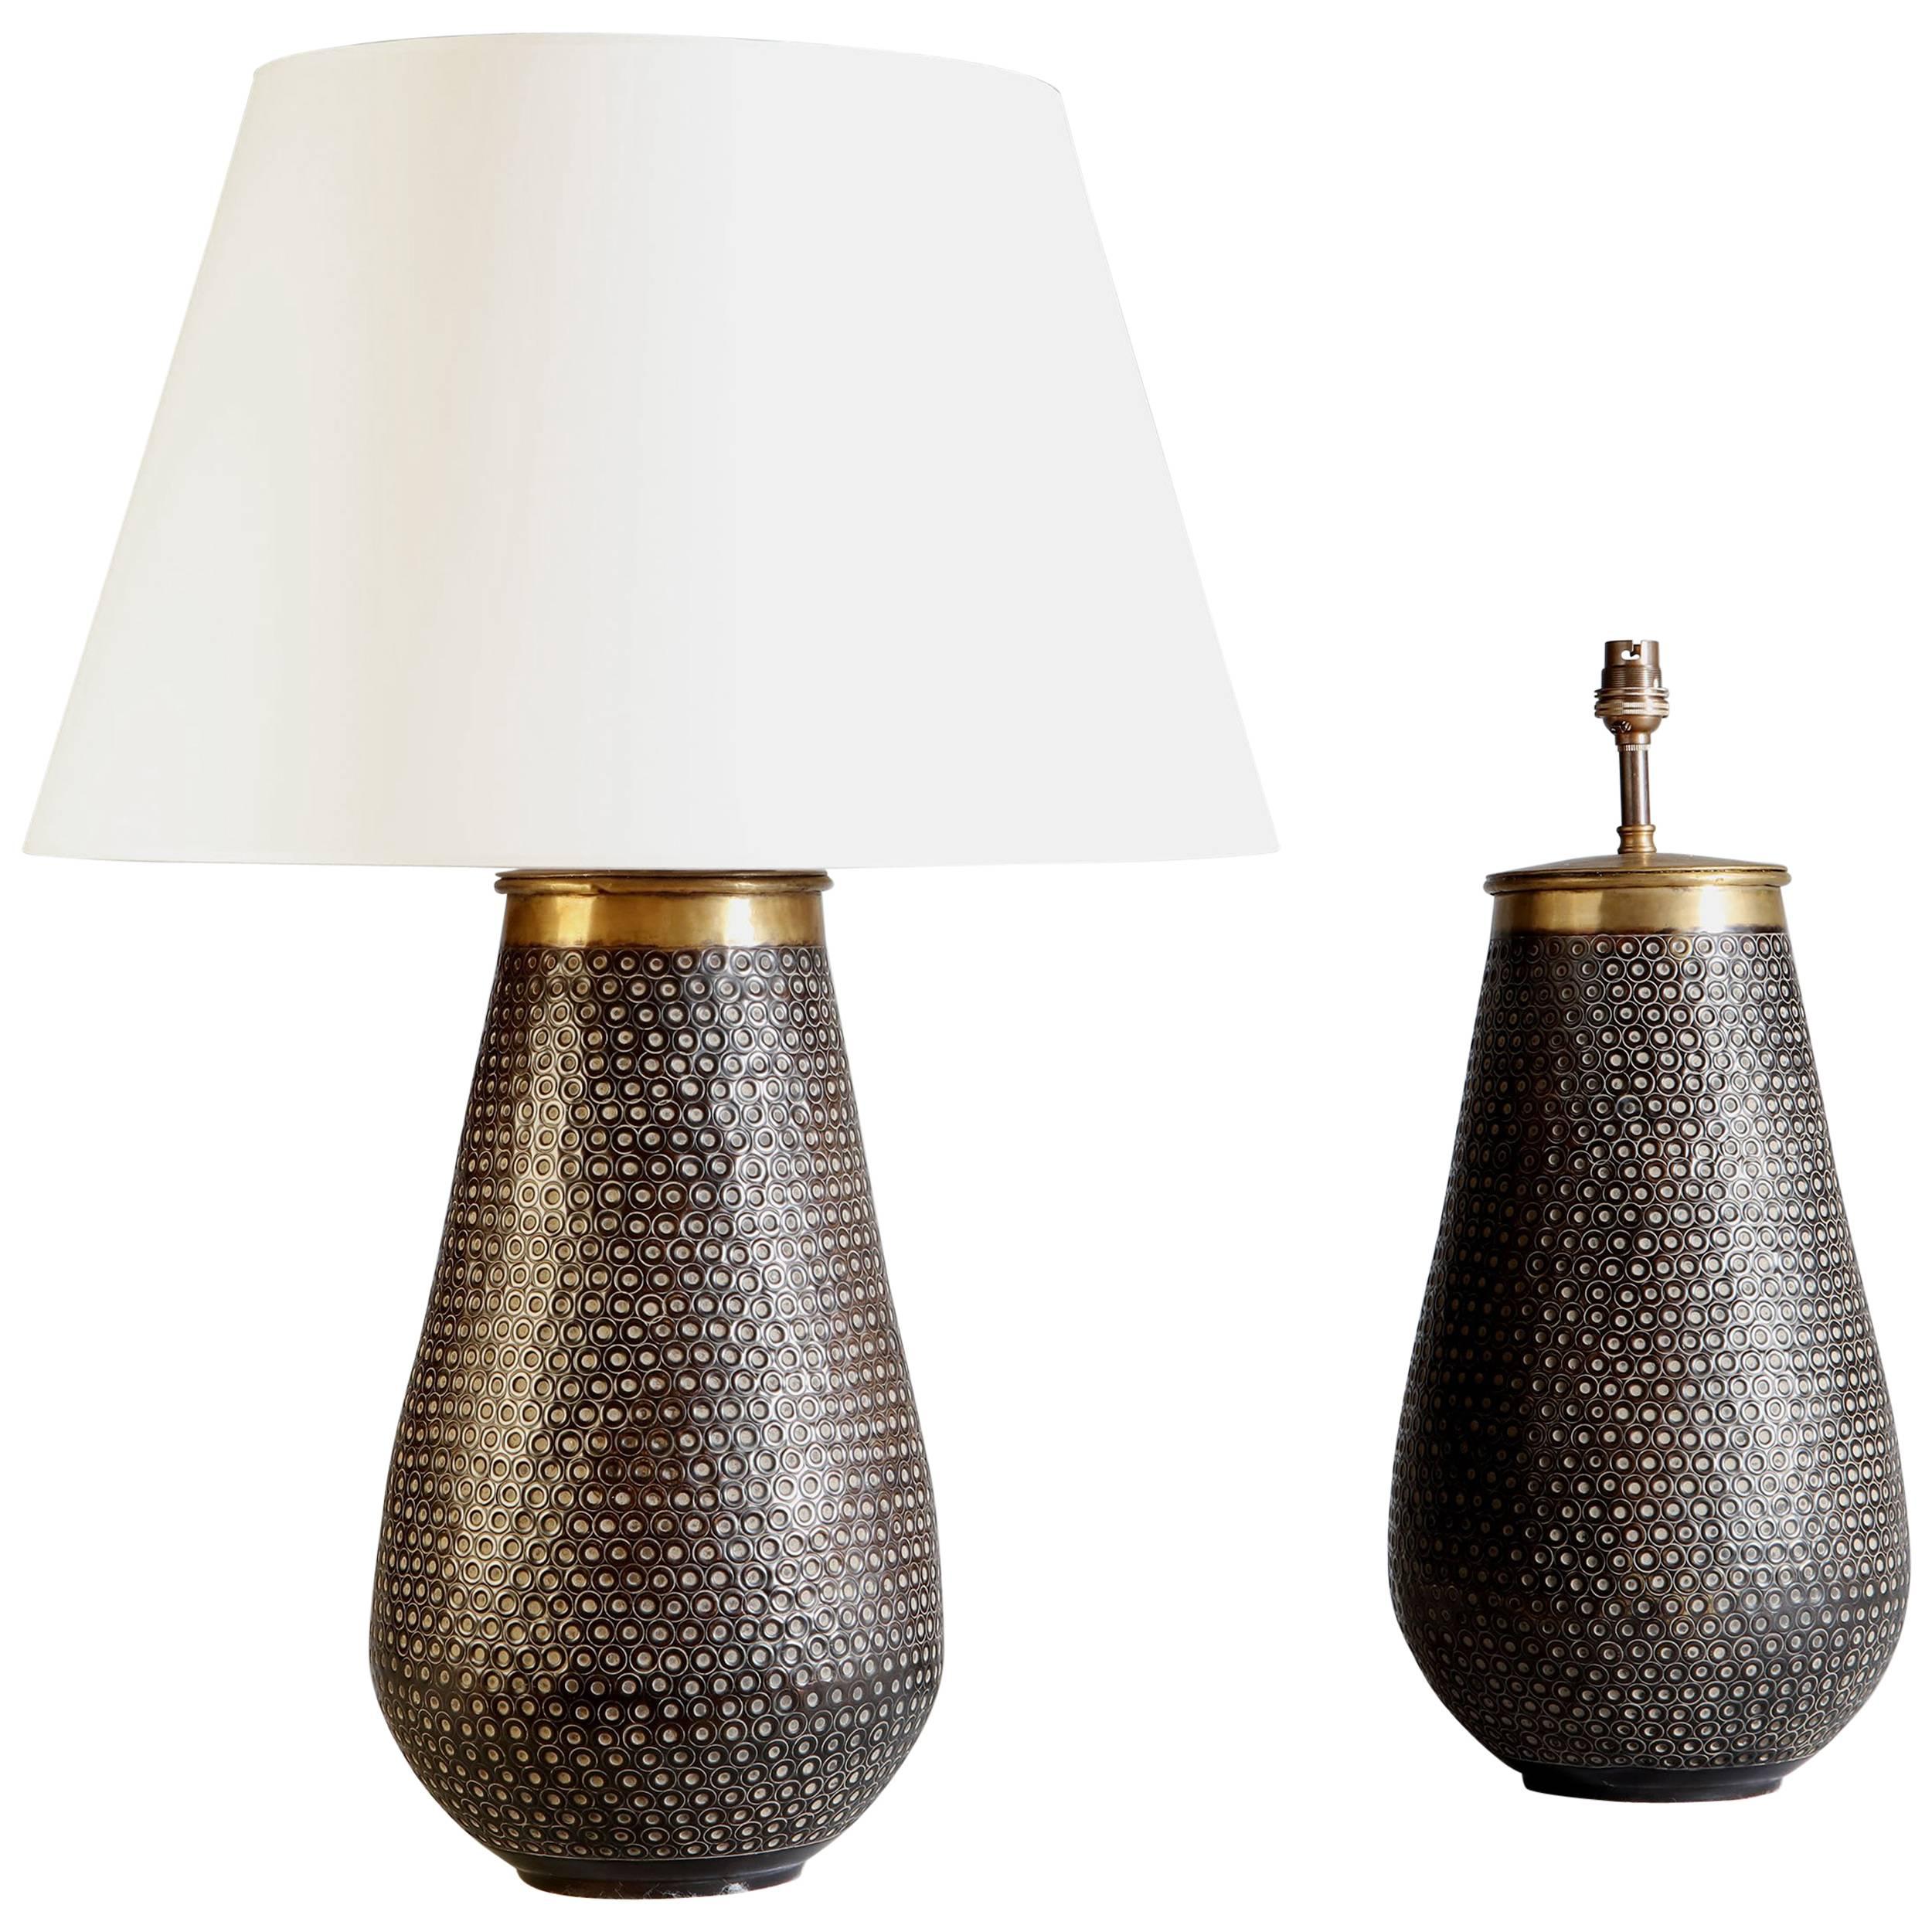 Pair of Punched Metal Lamps